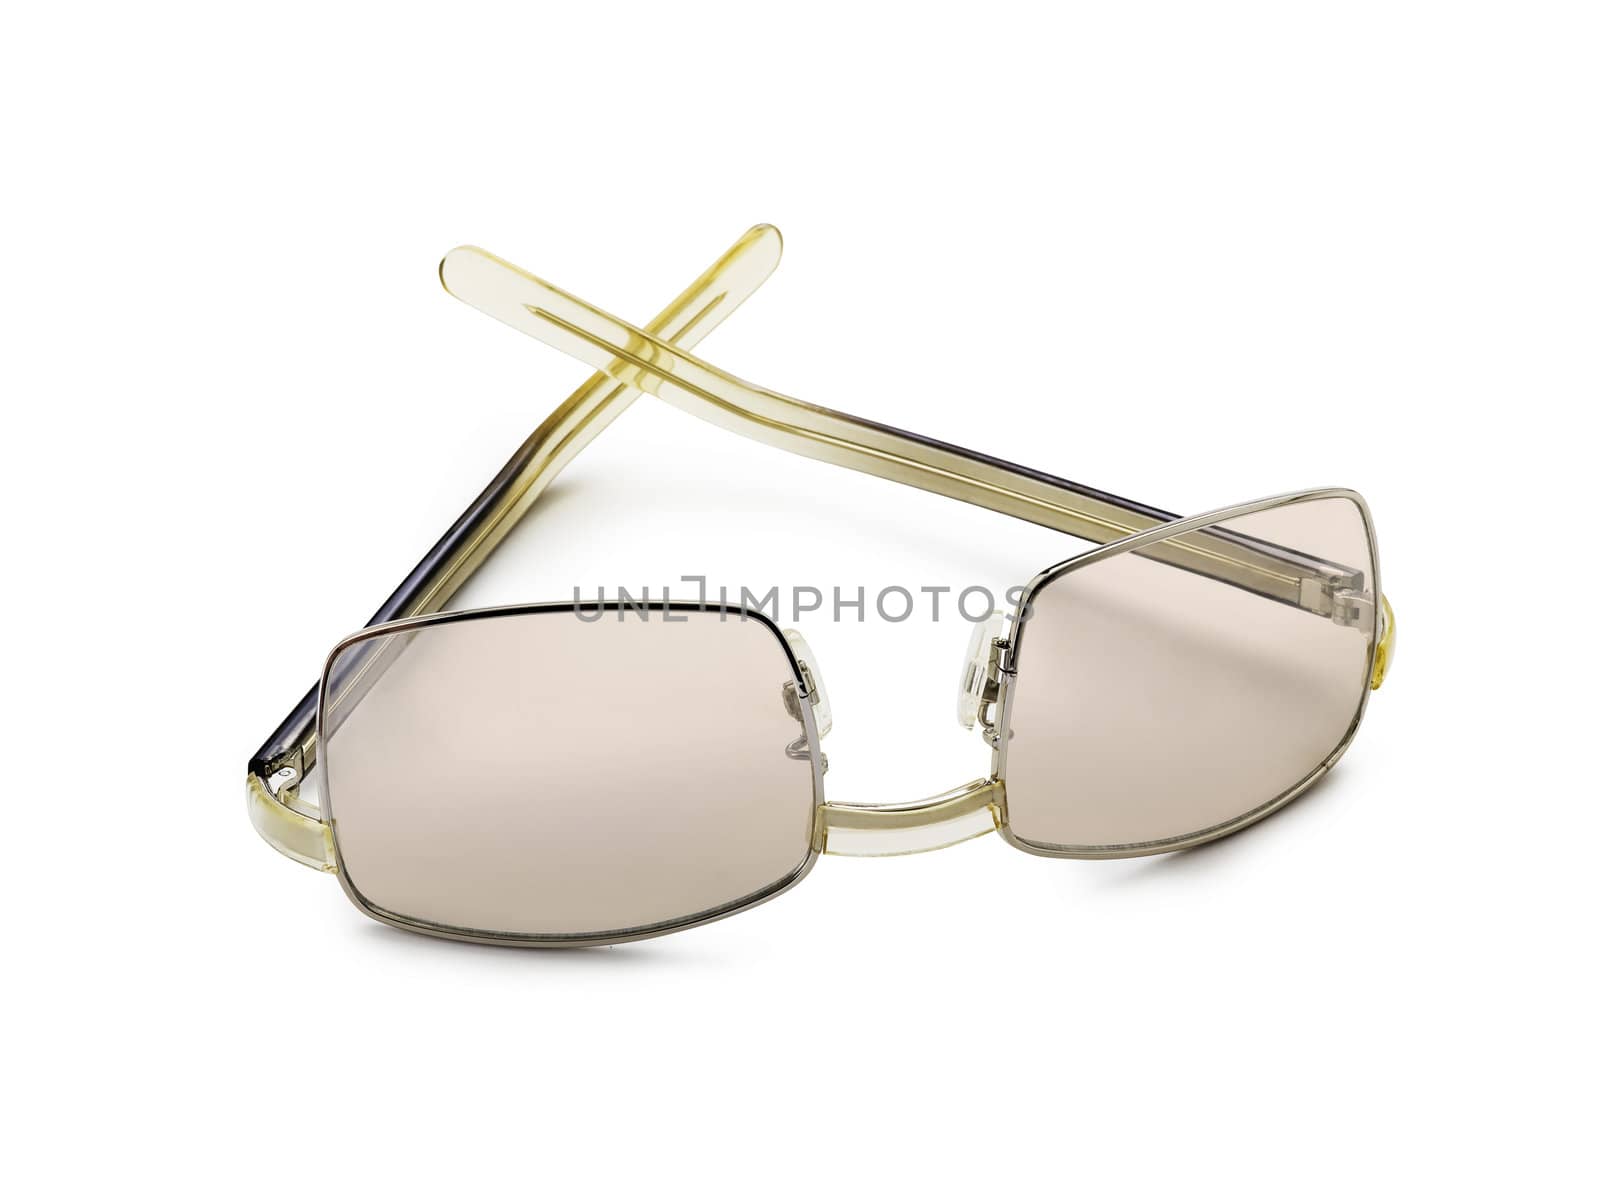 Brown sunglasses isolated on the white background by pbombaert